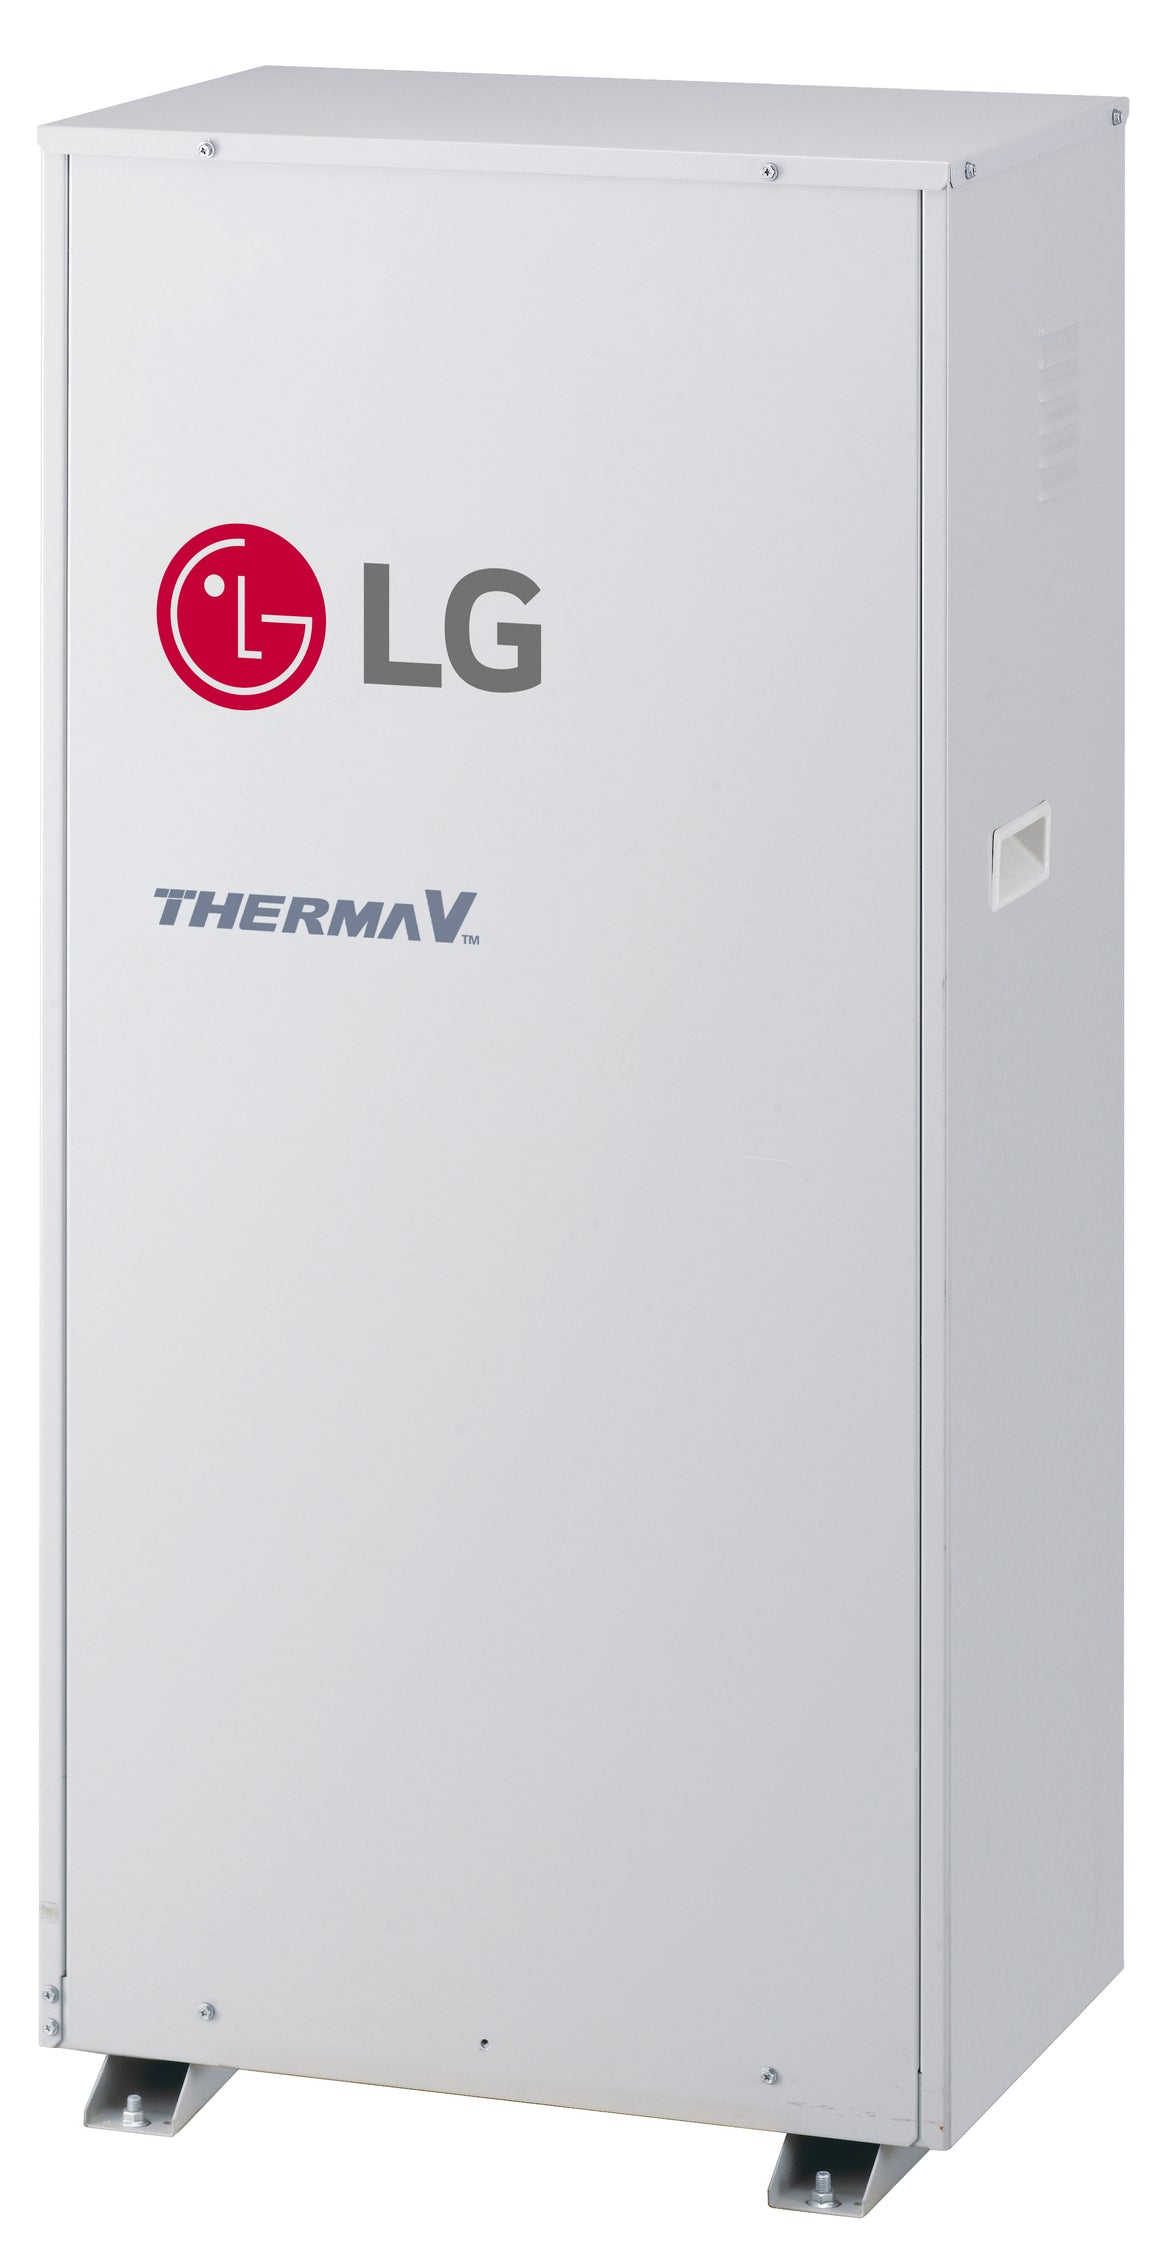 Therma V HIGH TEMPERATURE Split Heat Pump - 16kw Only